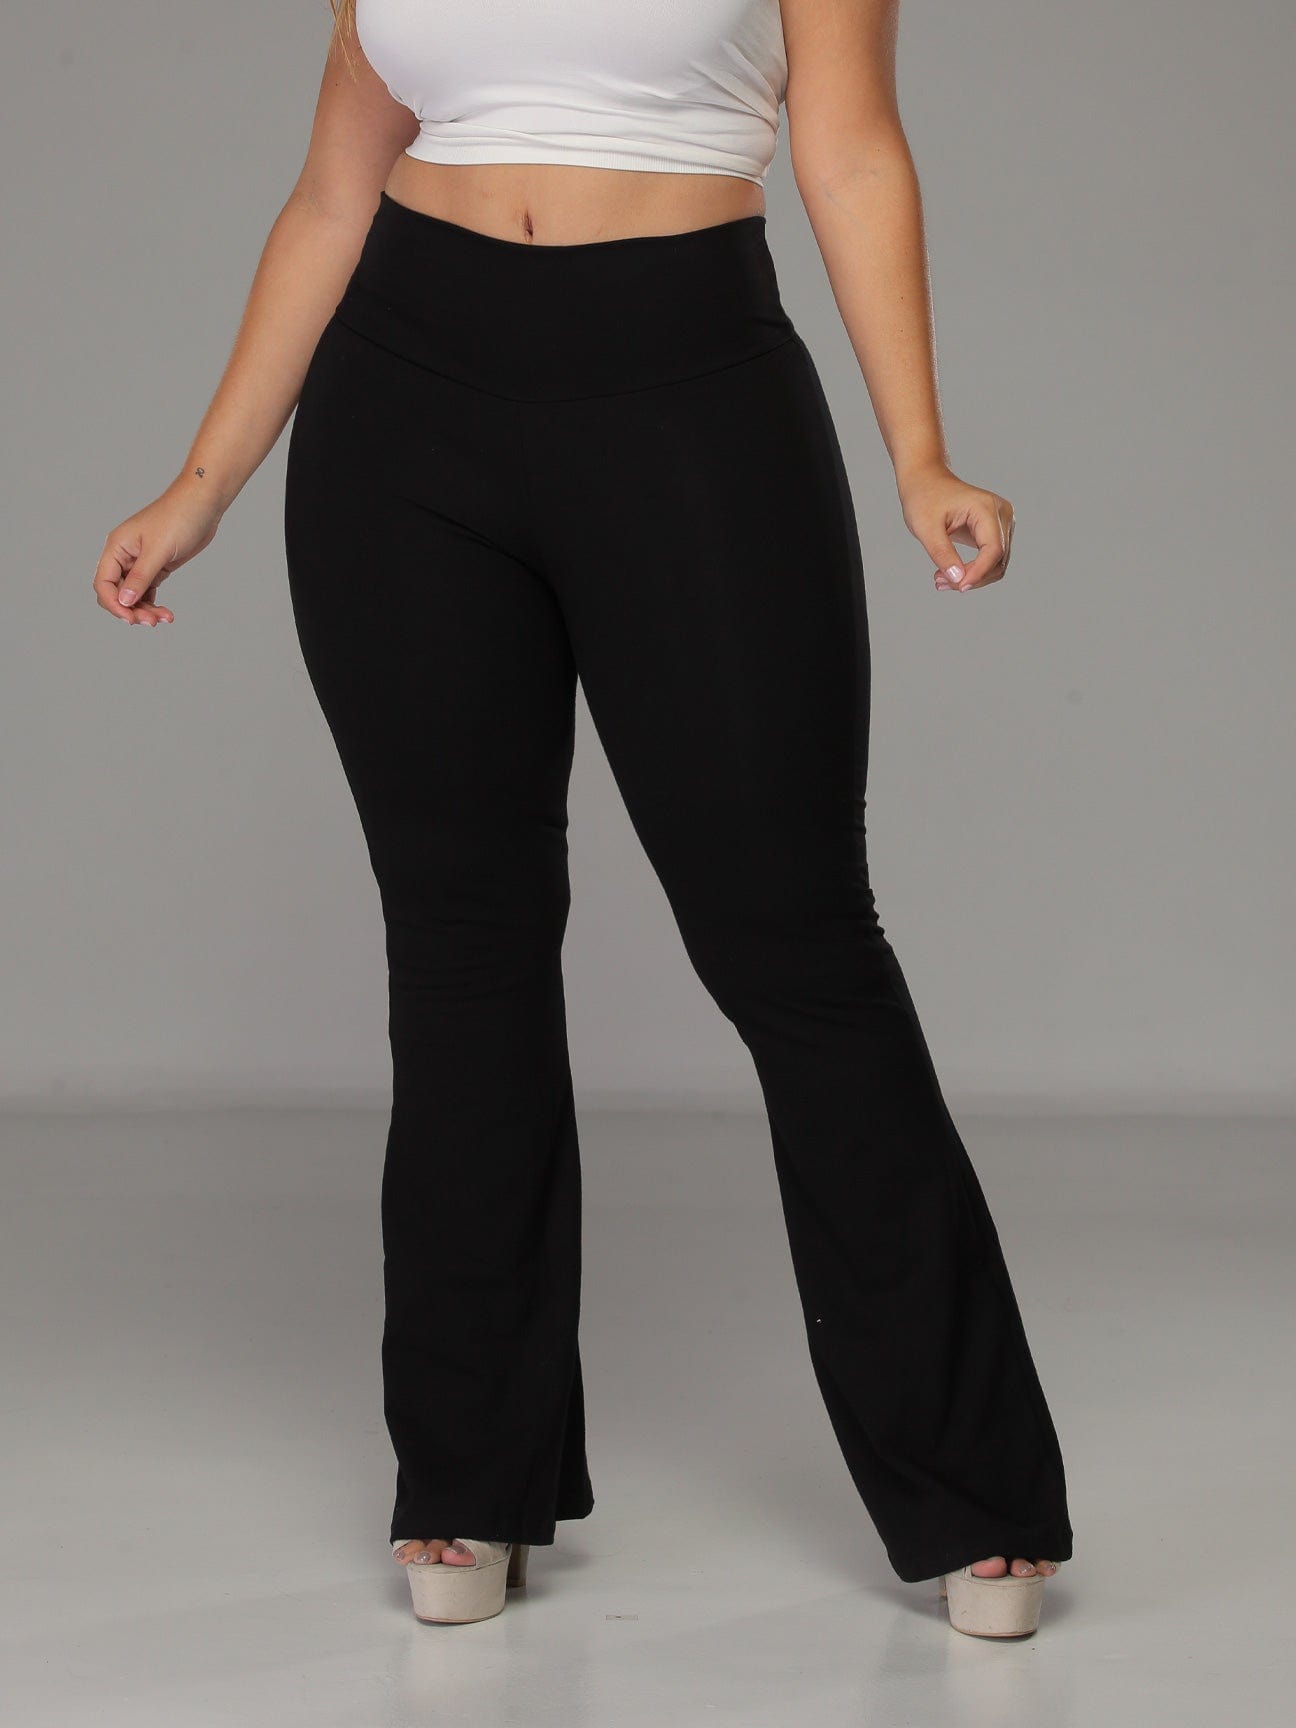 Empowered Butt Lift Flare Leggings with Tummy Control 1288